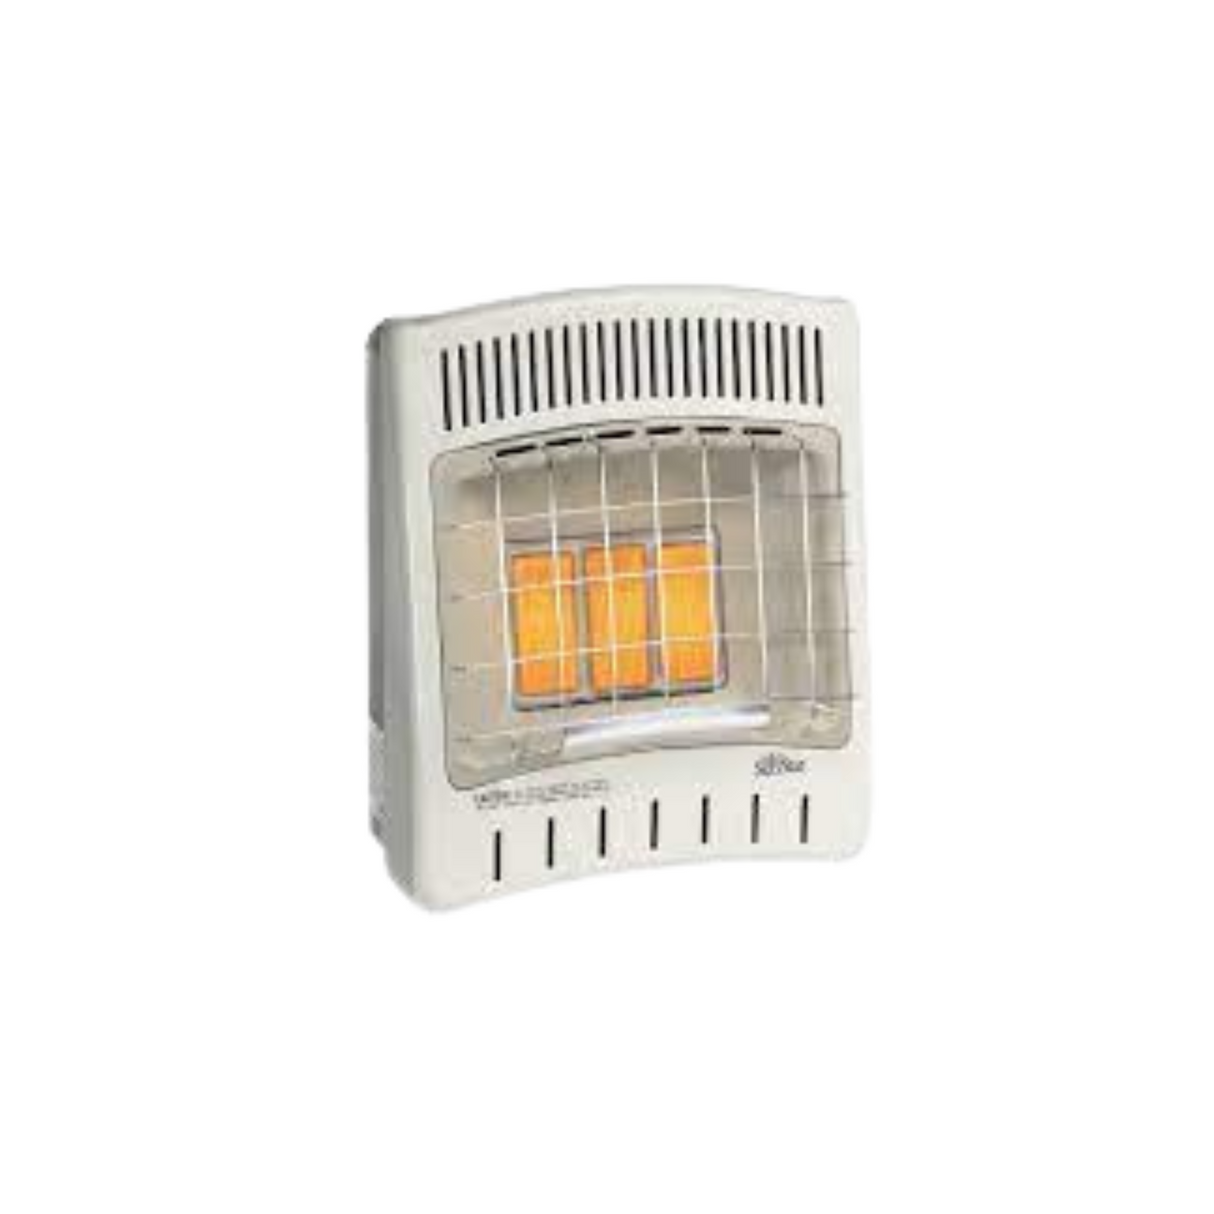 Sunstar Heating Products SC18M-N 18000 BTU Vent Free Infrared/Radiant Manual Heater, Natural Gas